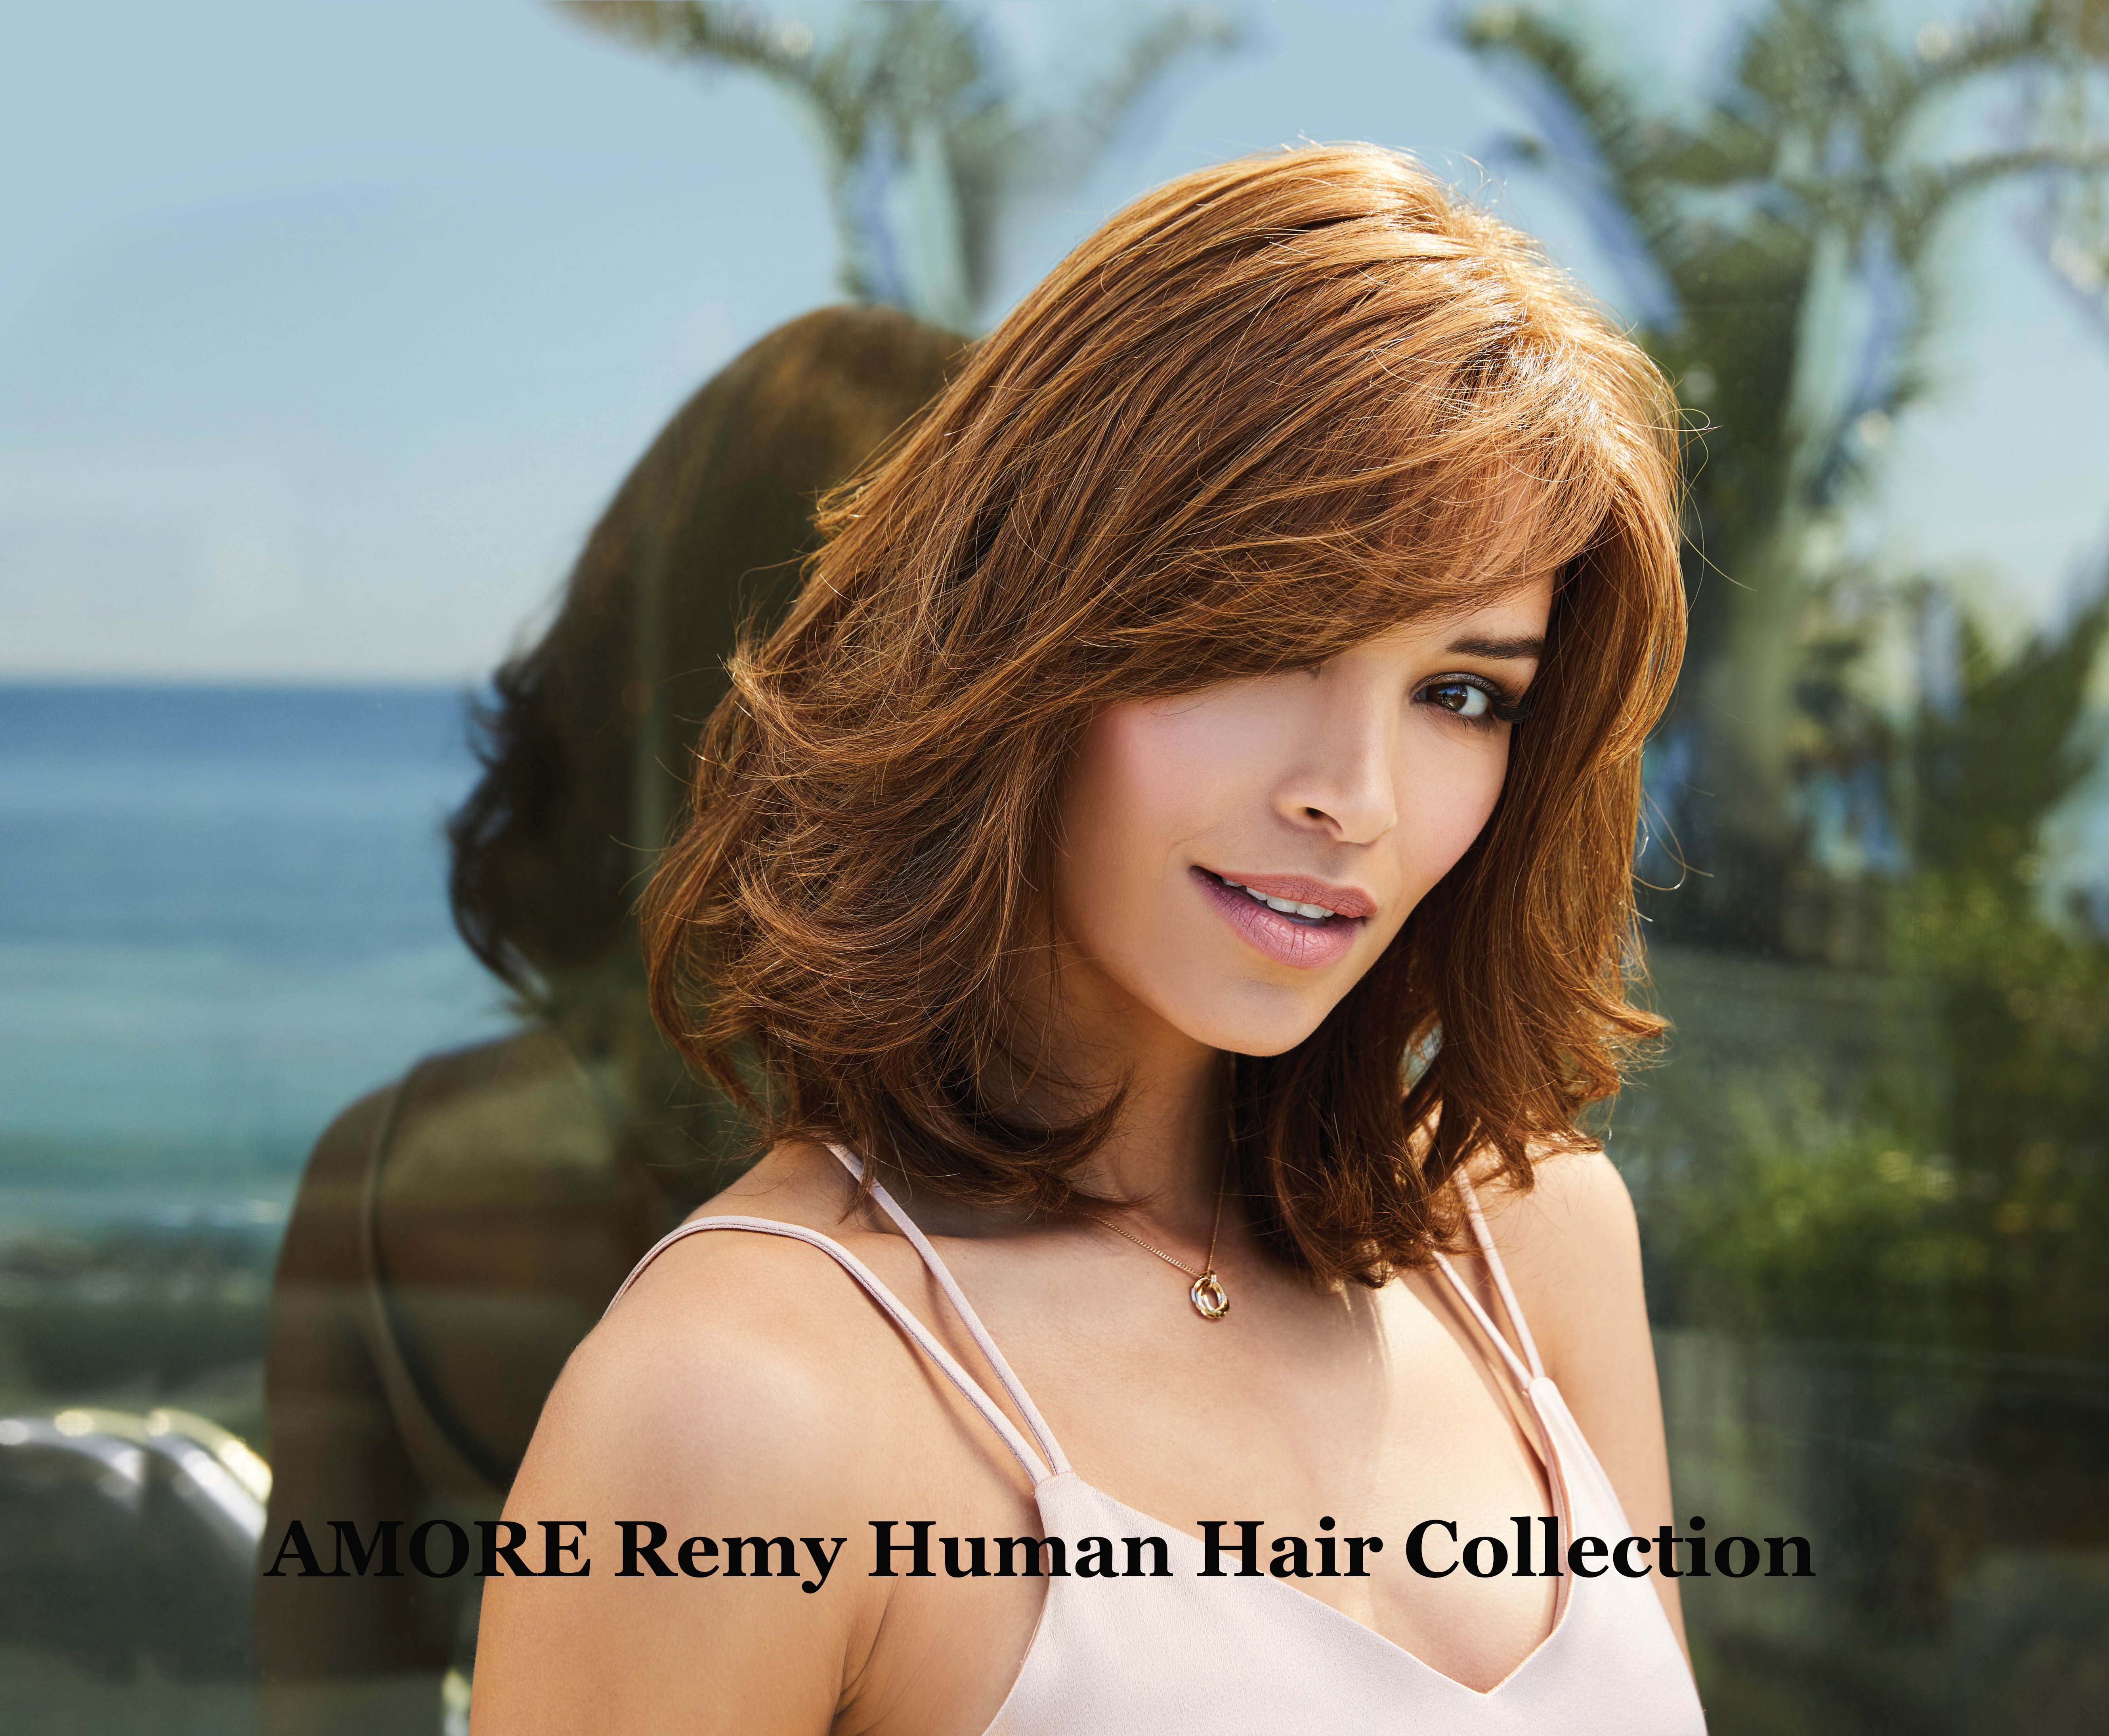 AMORE Remy Human Hair Collection of Wigs